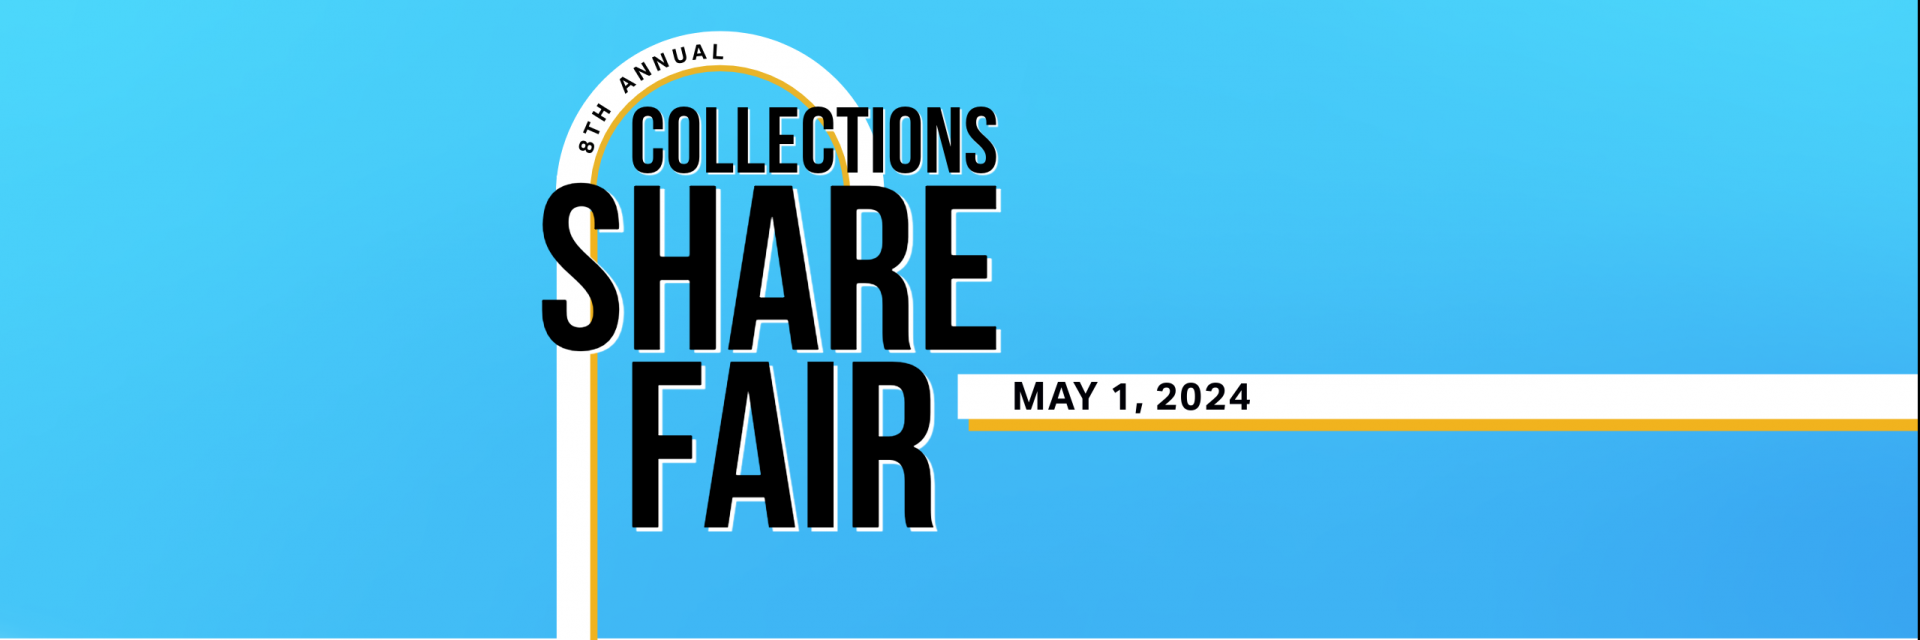 2024 Collections Share Fair May 1 2024